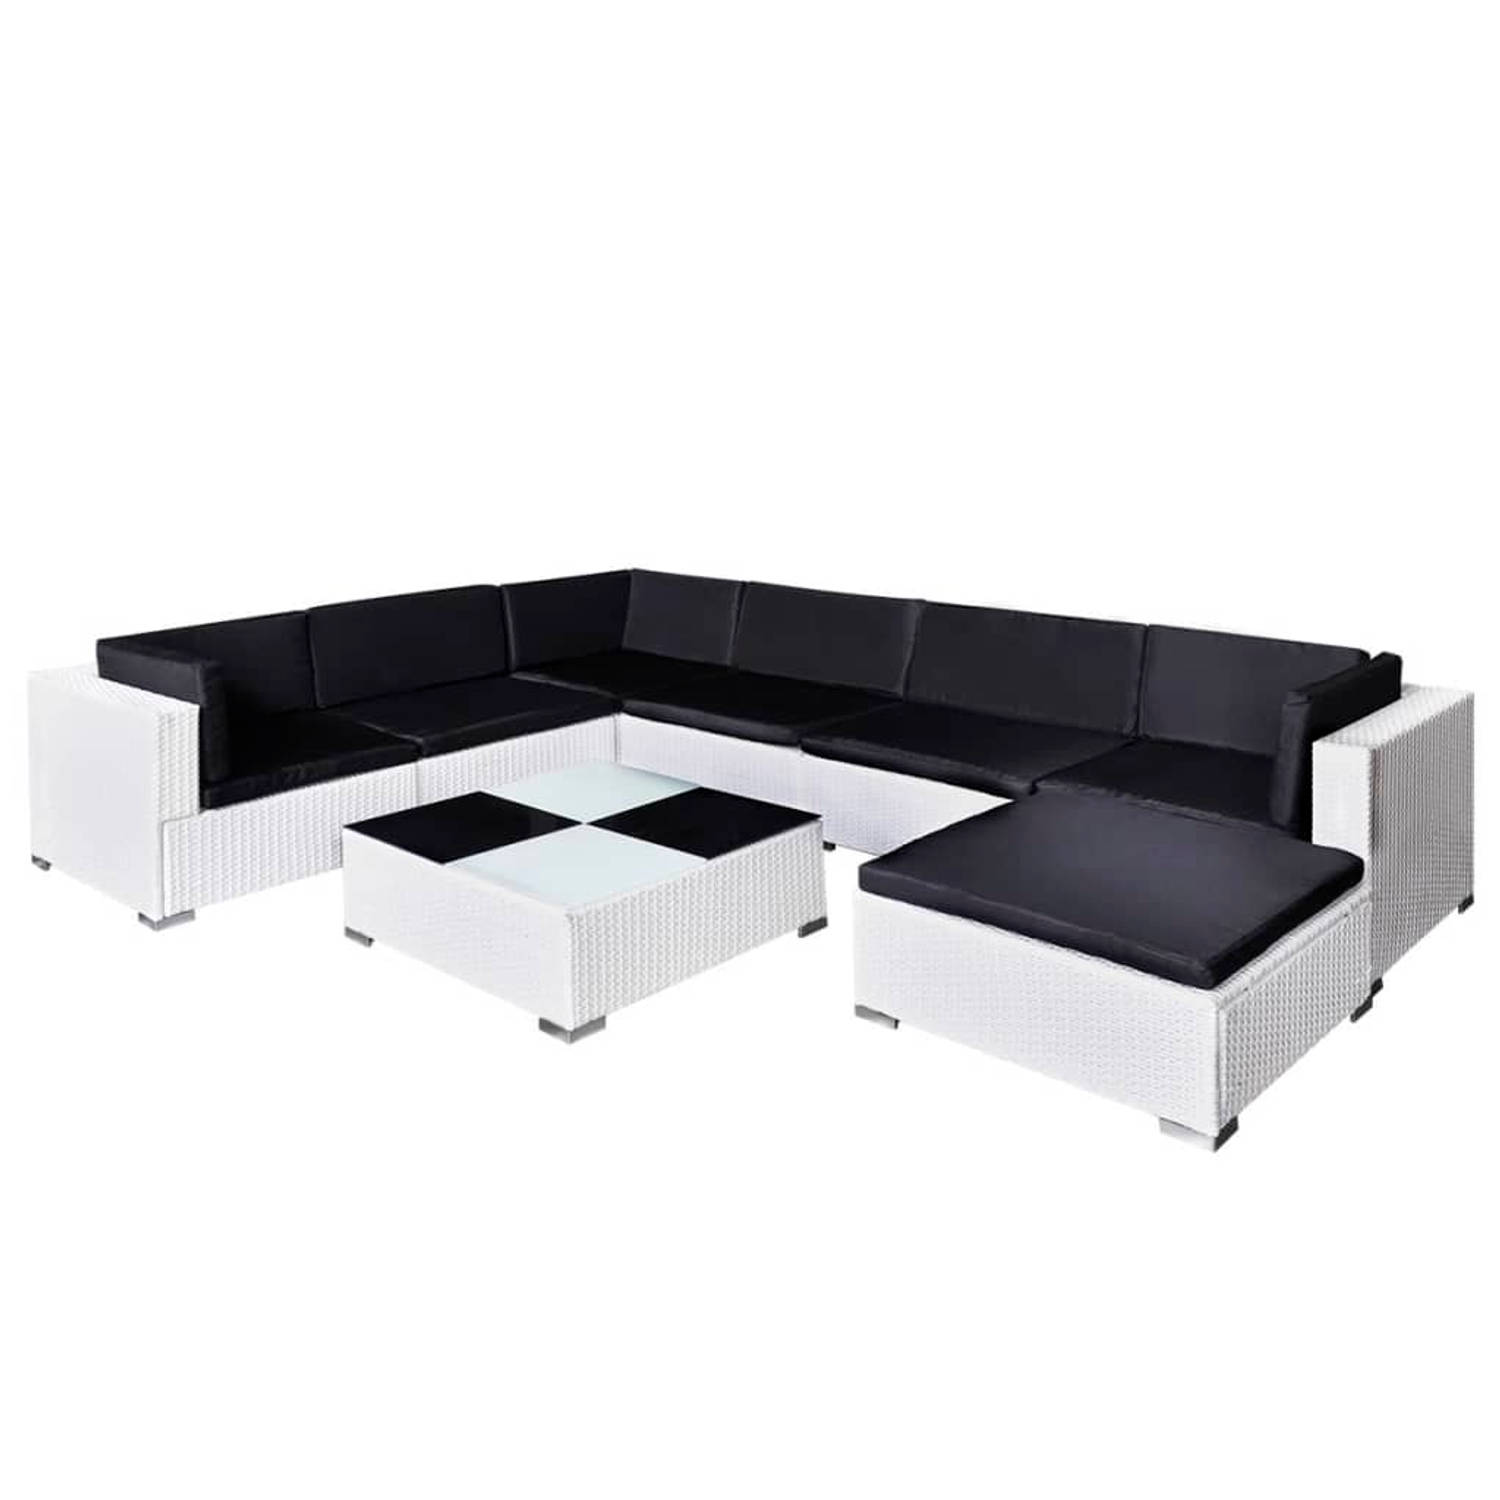 The Living Store-8-delige-Loungeset-met-kussens-poly-rattan-wit - Tuinset